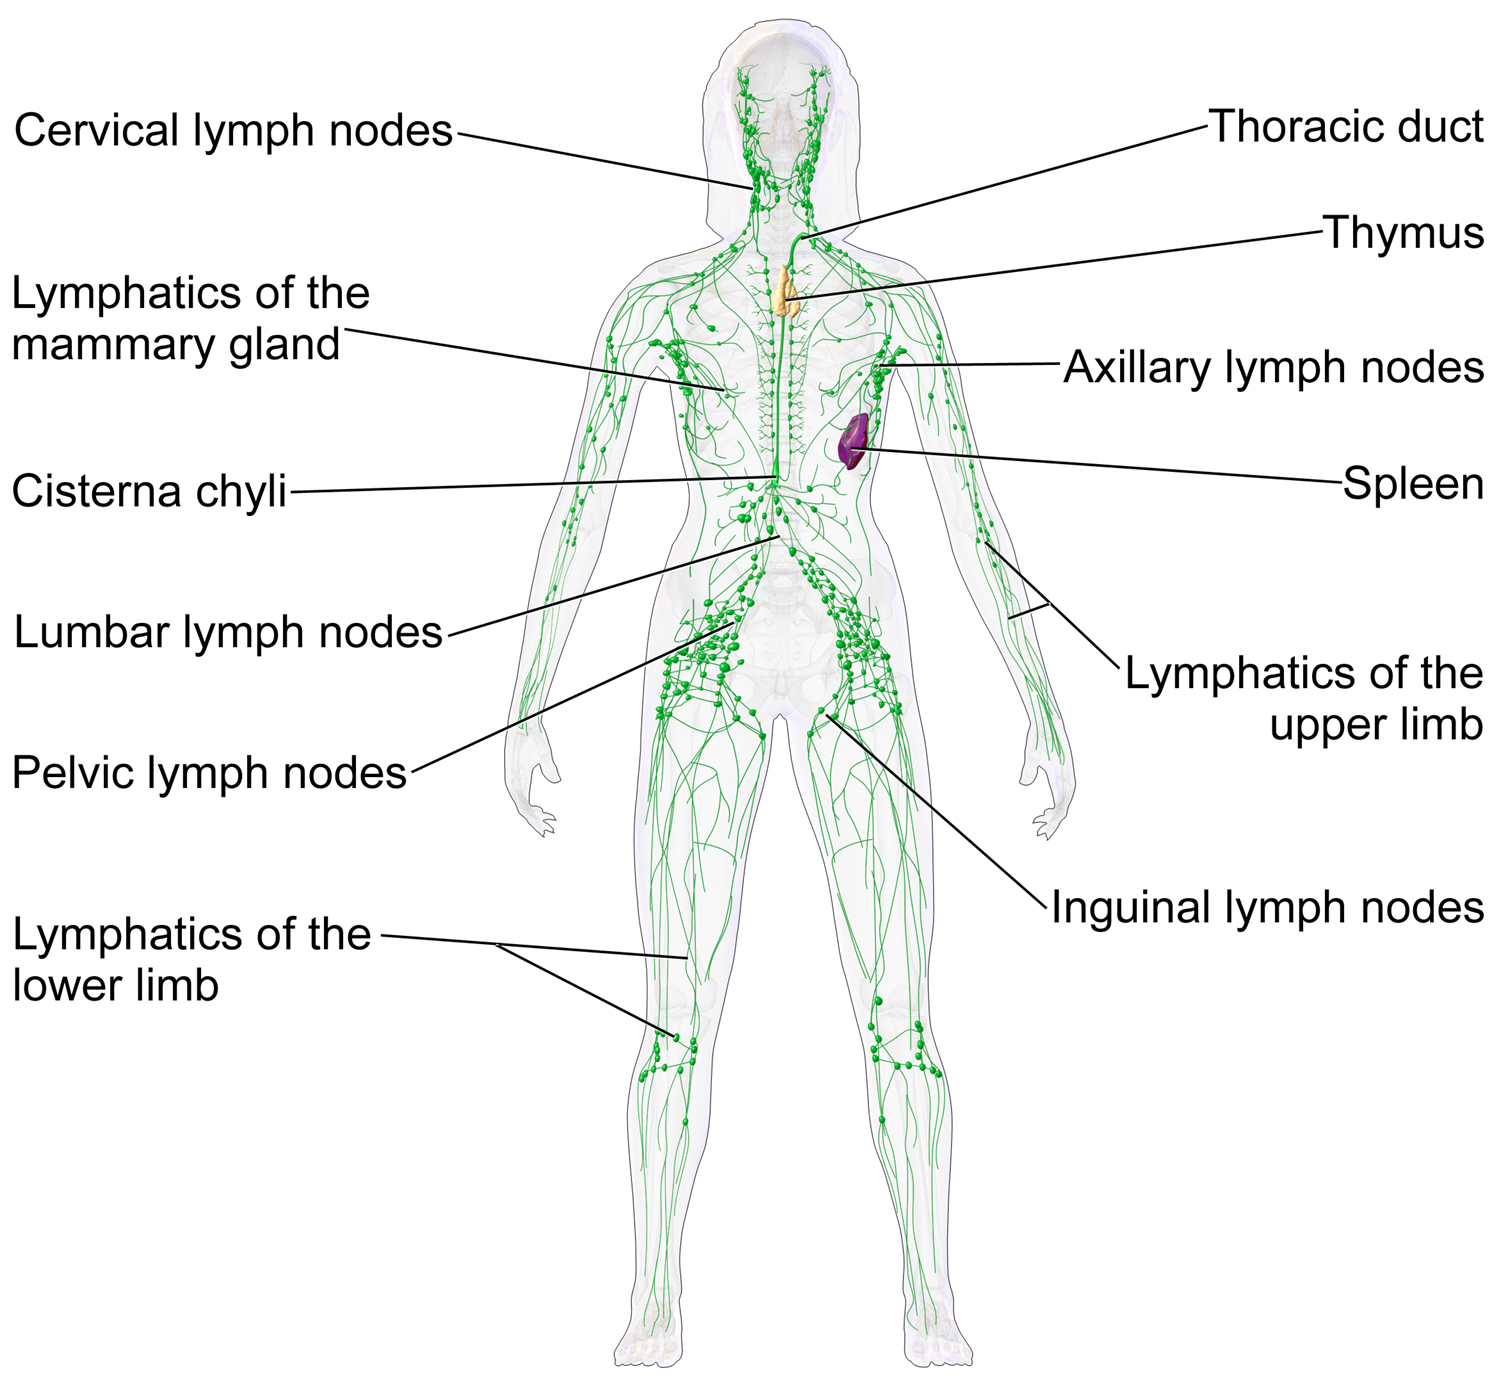 Lymphatic organs and vessels